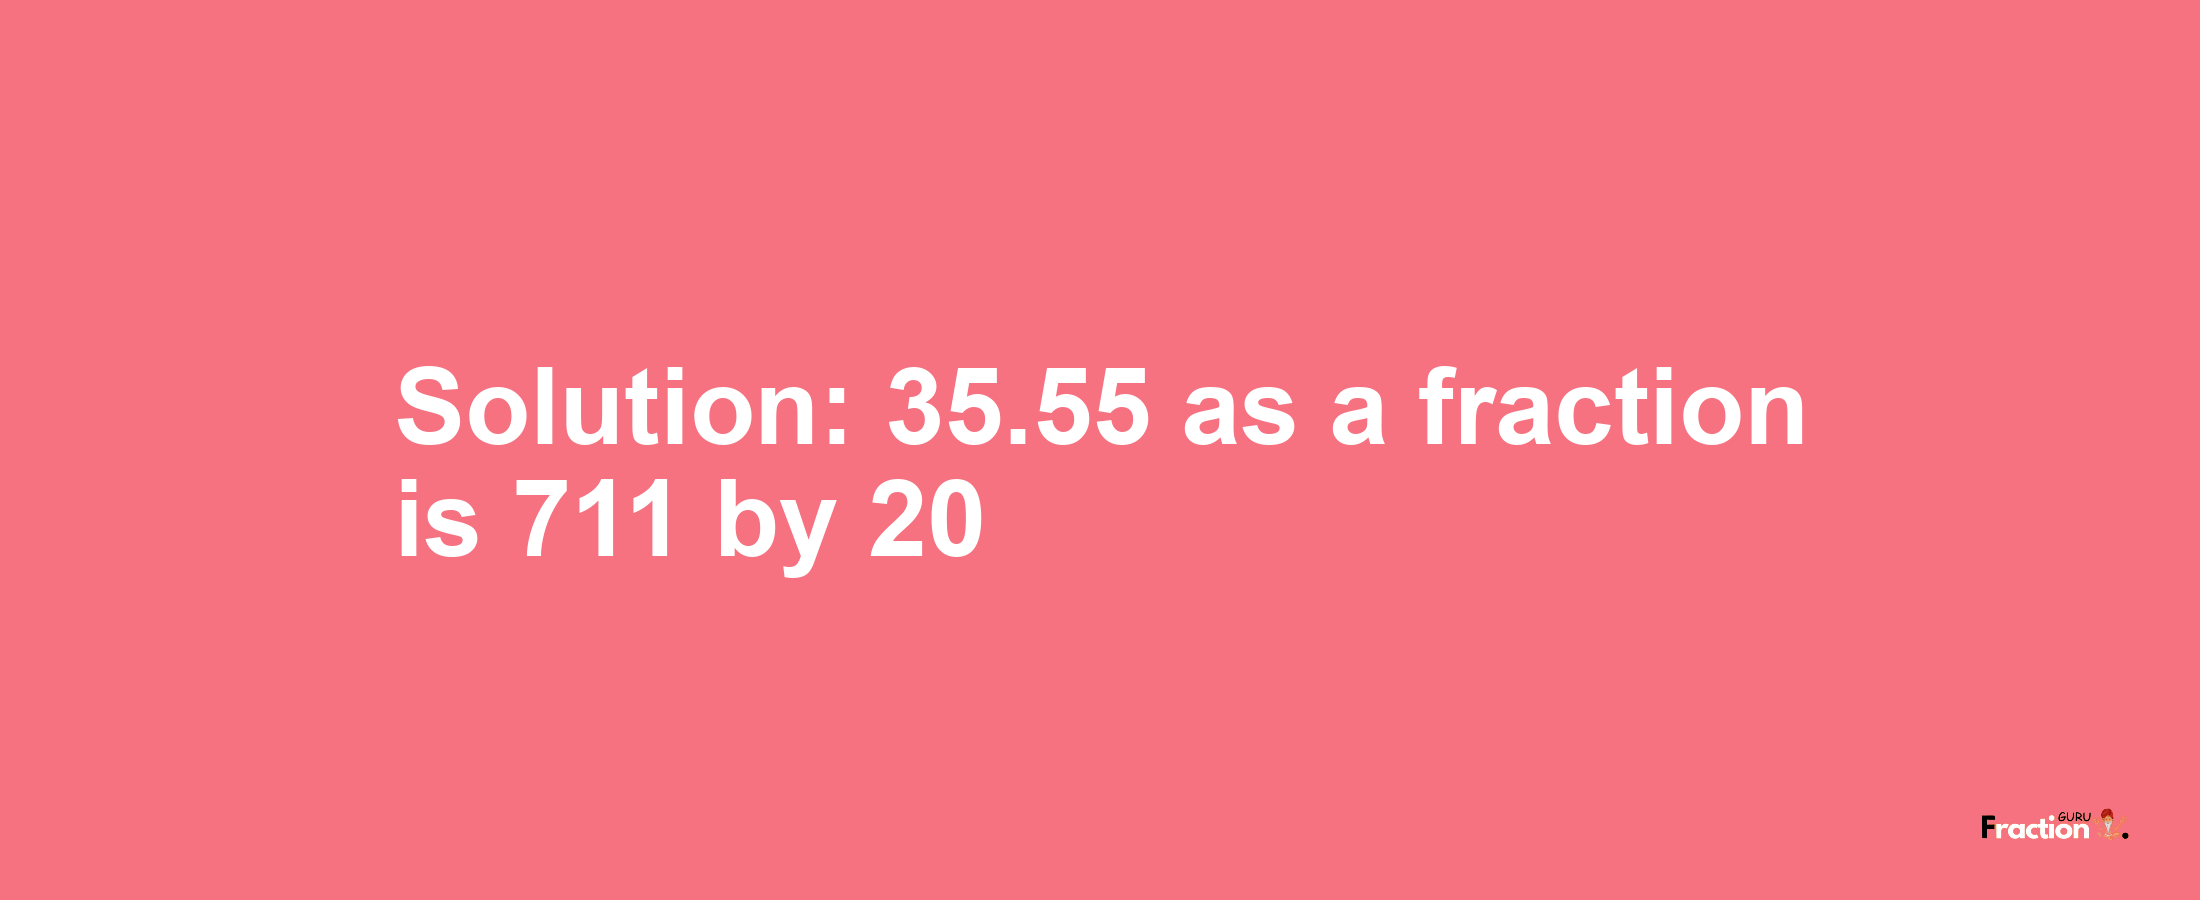 Solution:35.55 as a fraction is 711/20